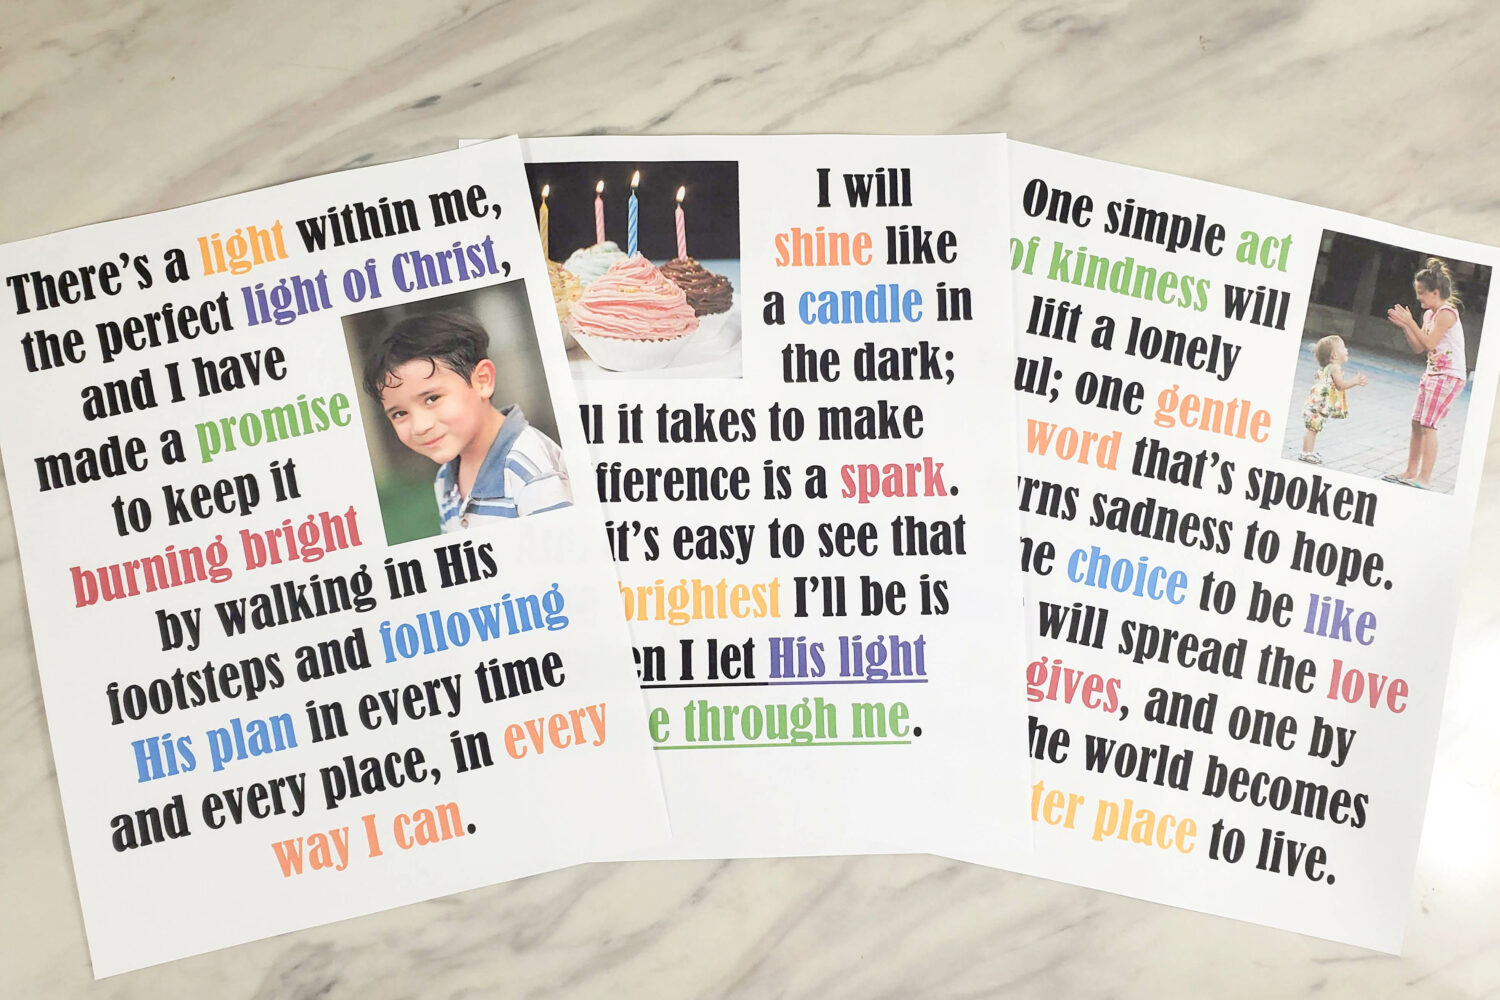 I Will Shine Flip Chart new Primary song by Shawna Edwards lyrics and flipcharts in 3 different styles including colorful, black and white lyrics only, and slideshow options!